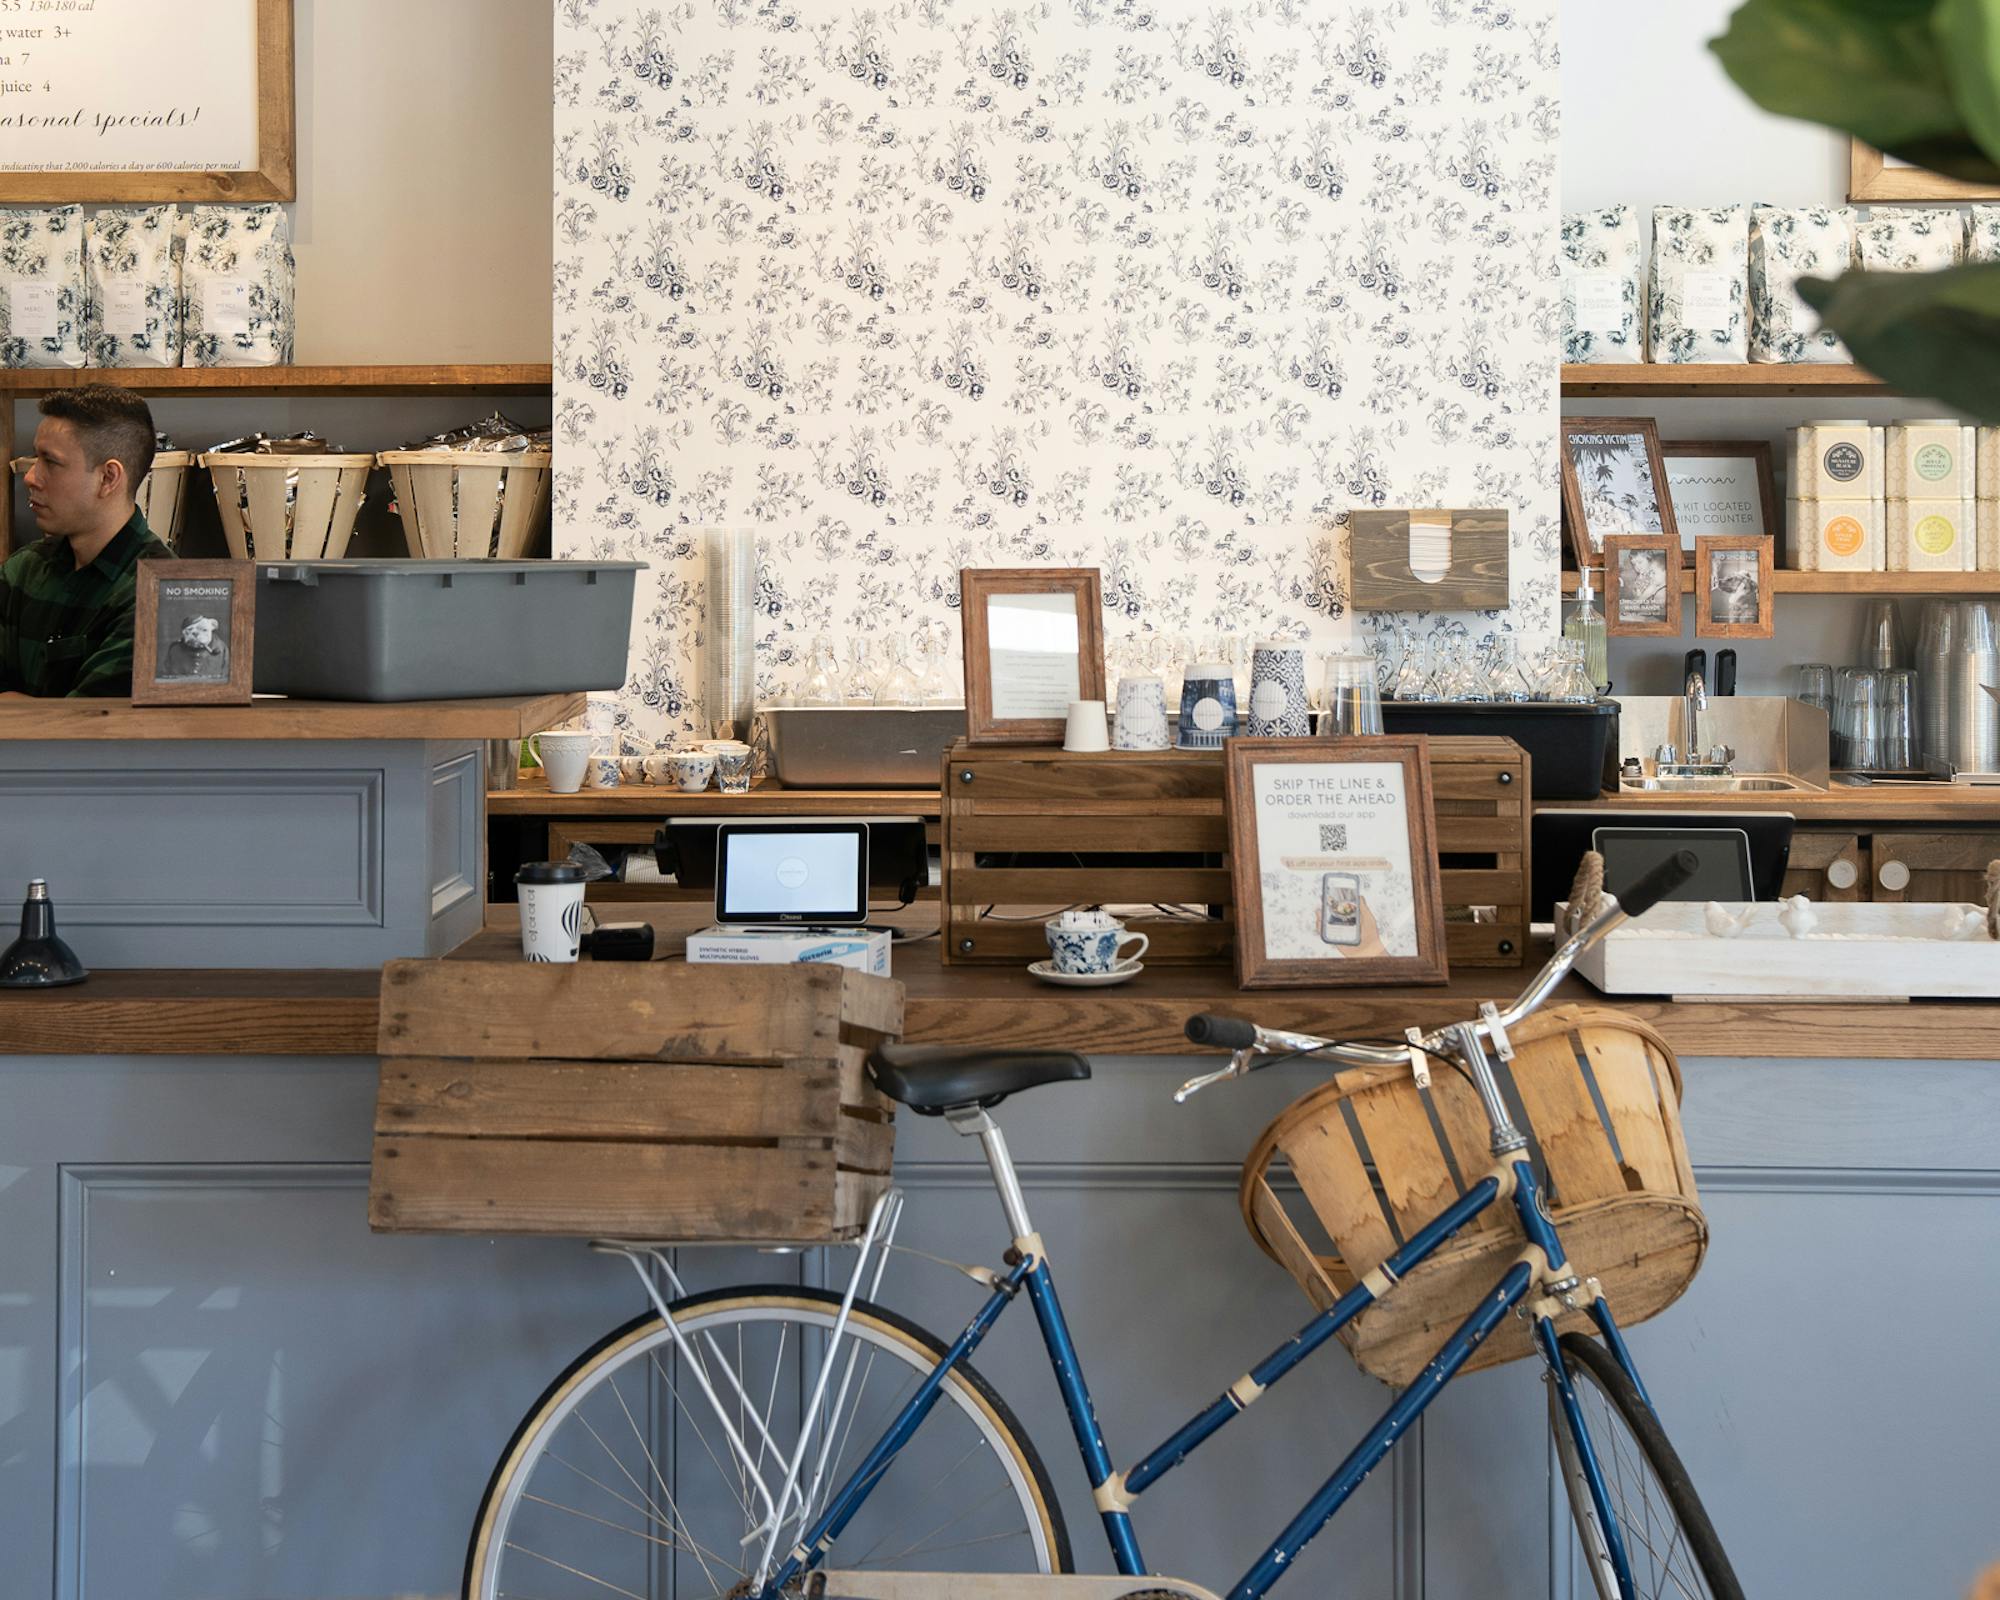 union market interior - front counter with bicycle and basket